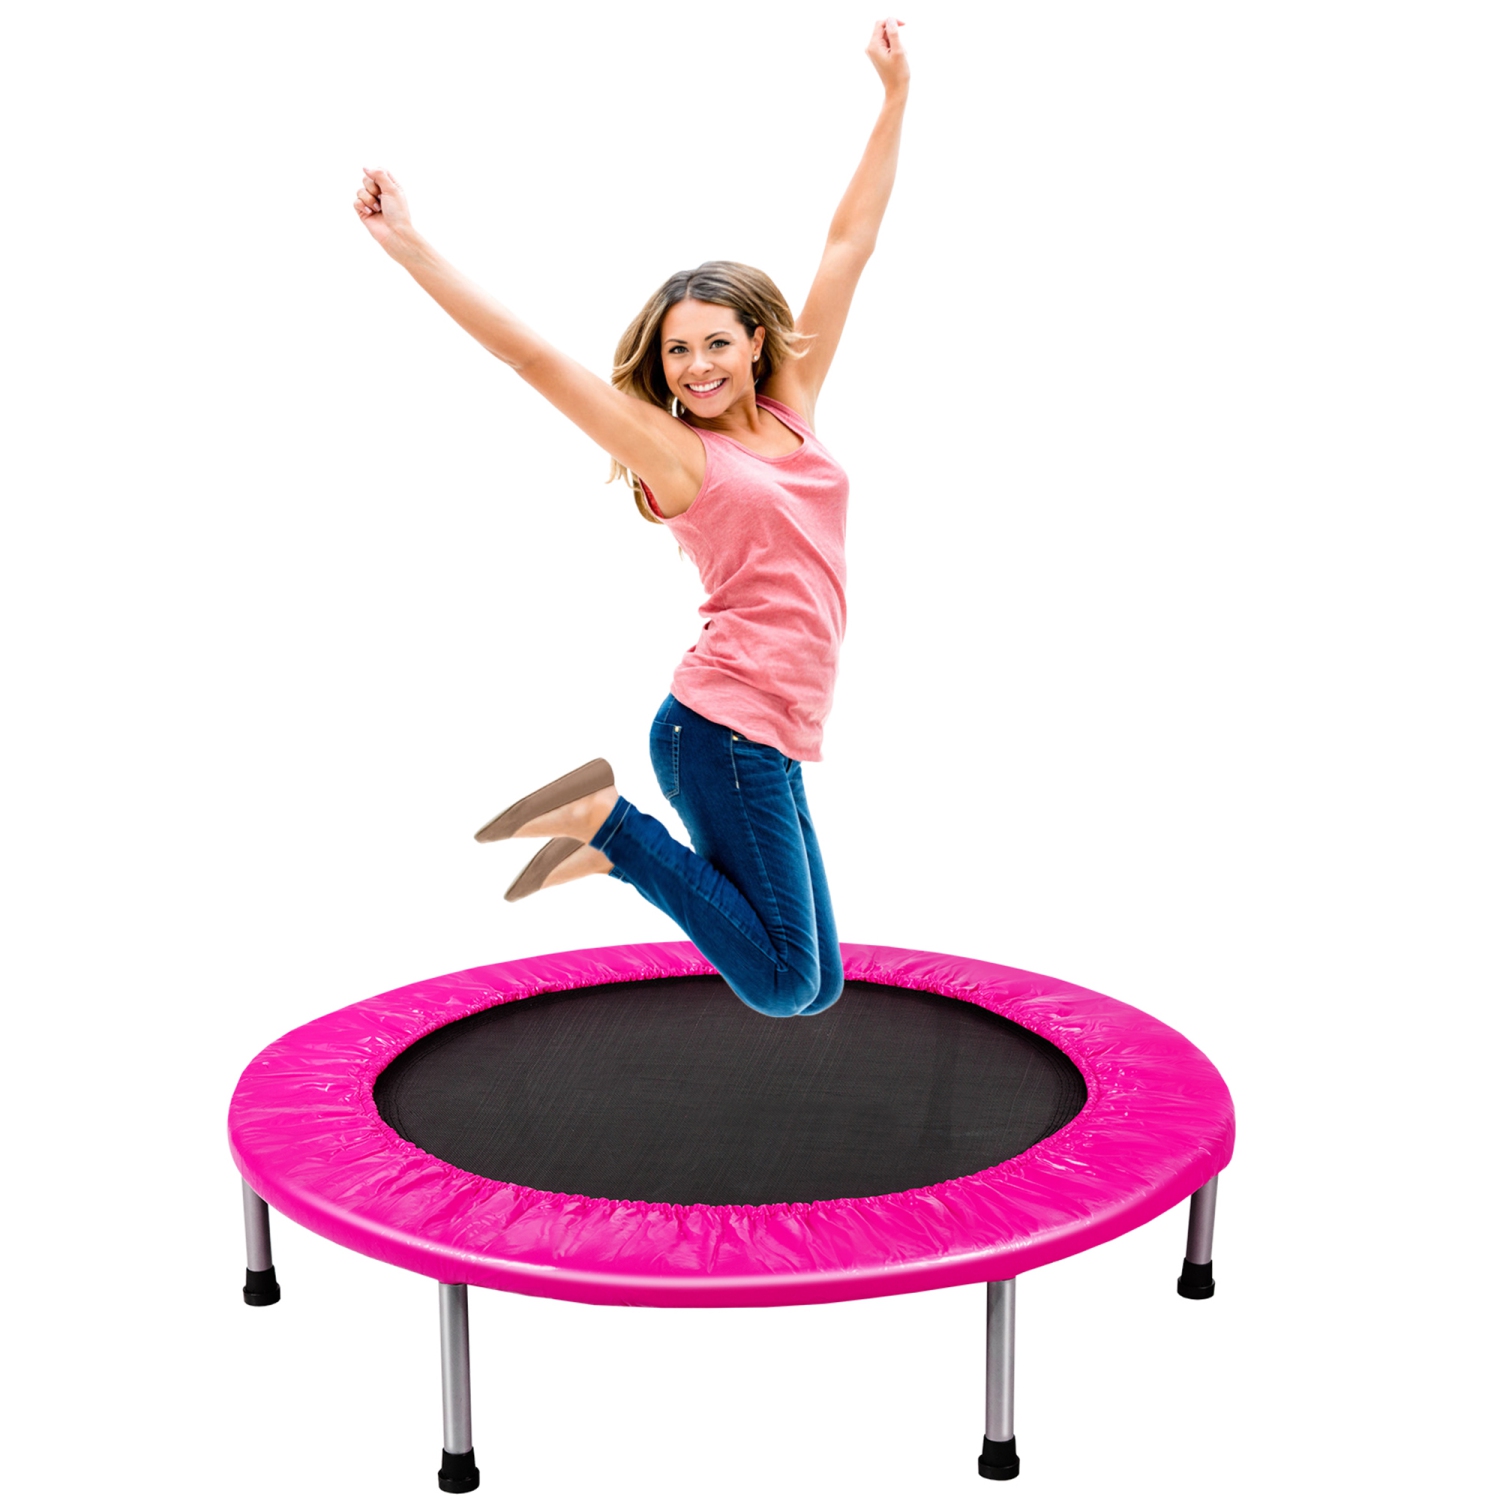 Gymax 38 in. Blue Folding Mini Trampoline Fitness Rebounder with Safety Pad  GYM06597 - The Home Depot